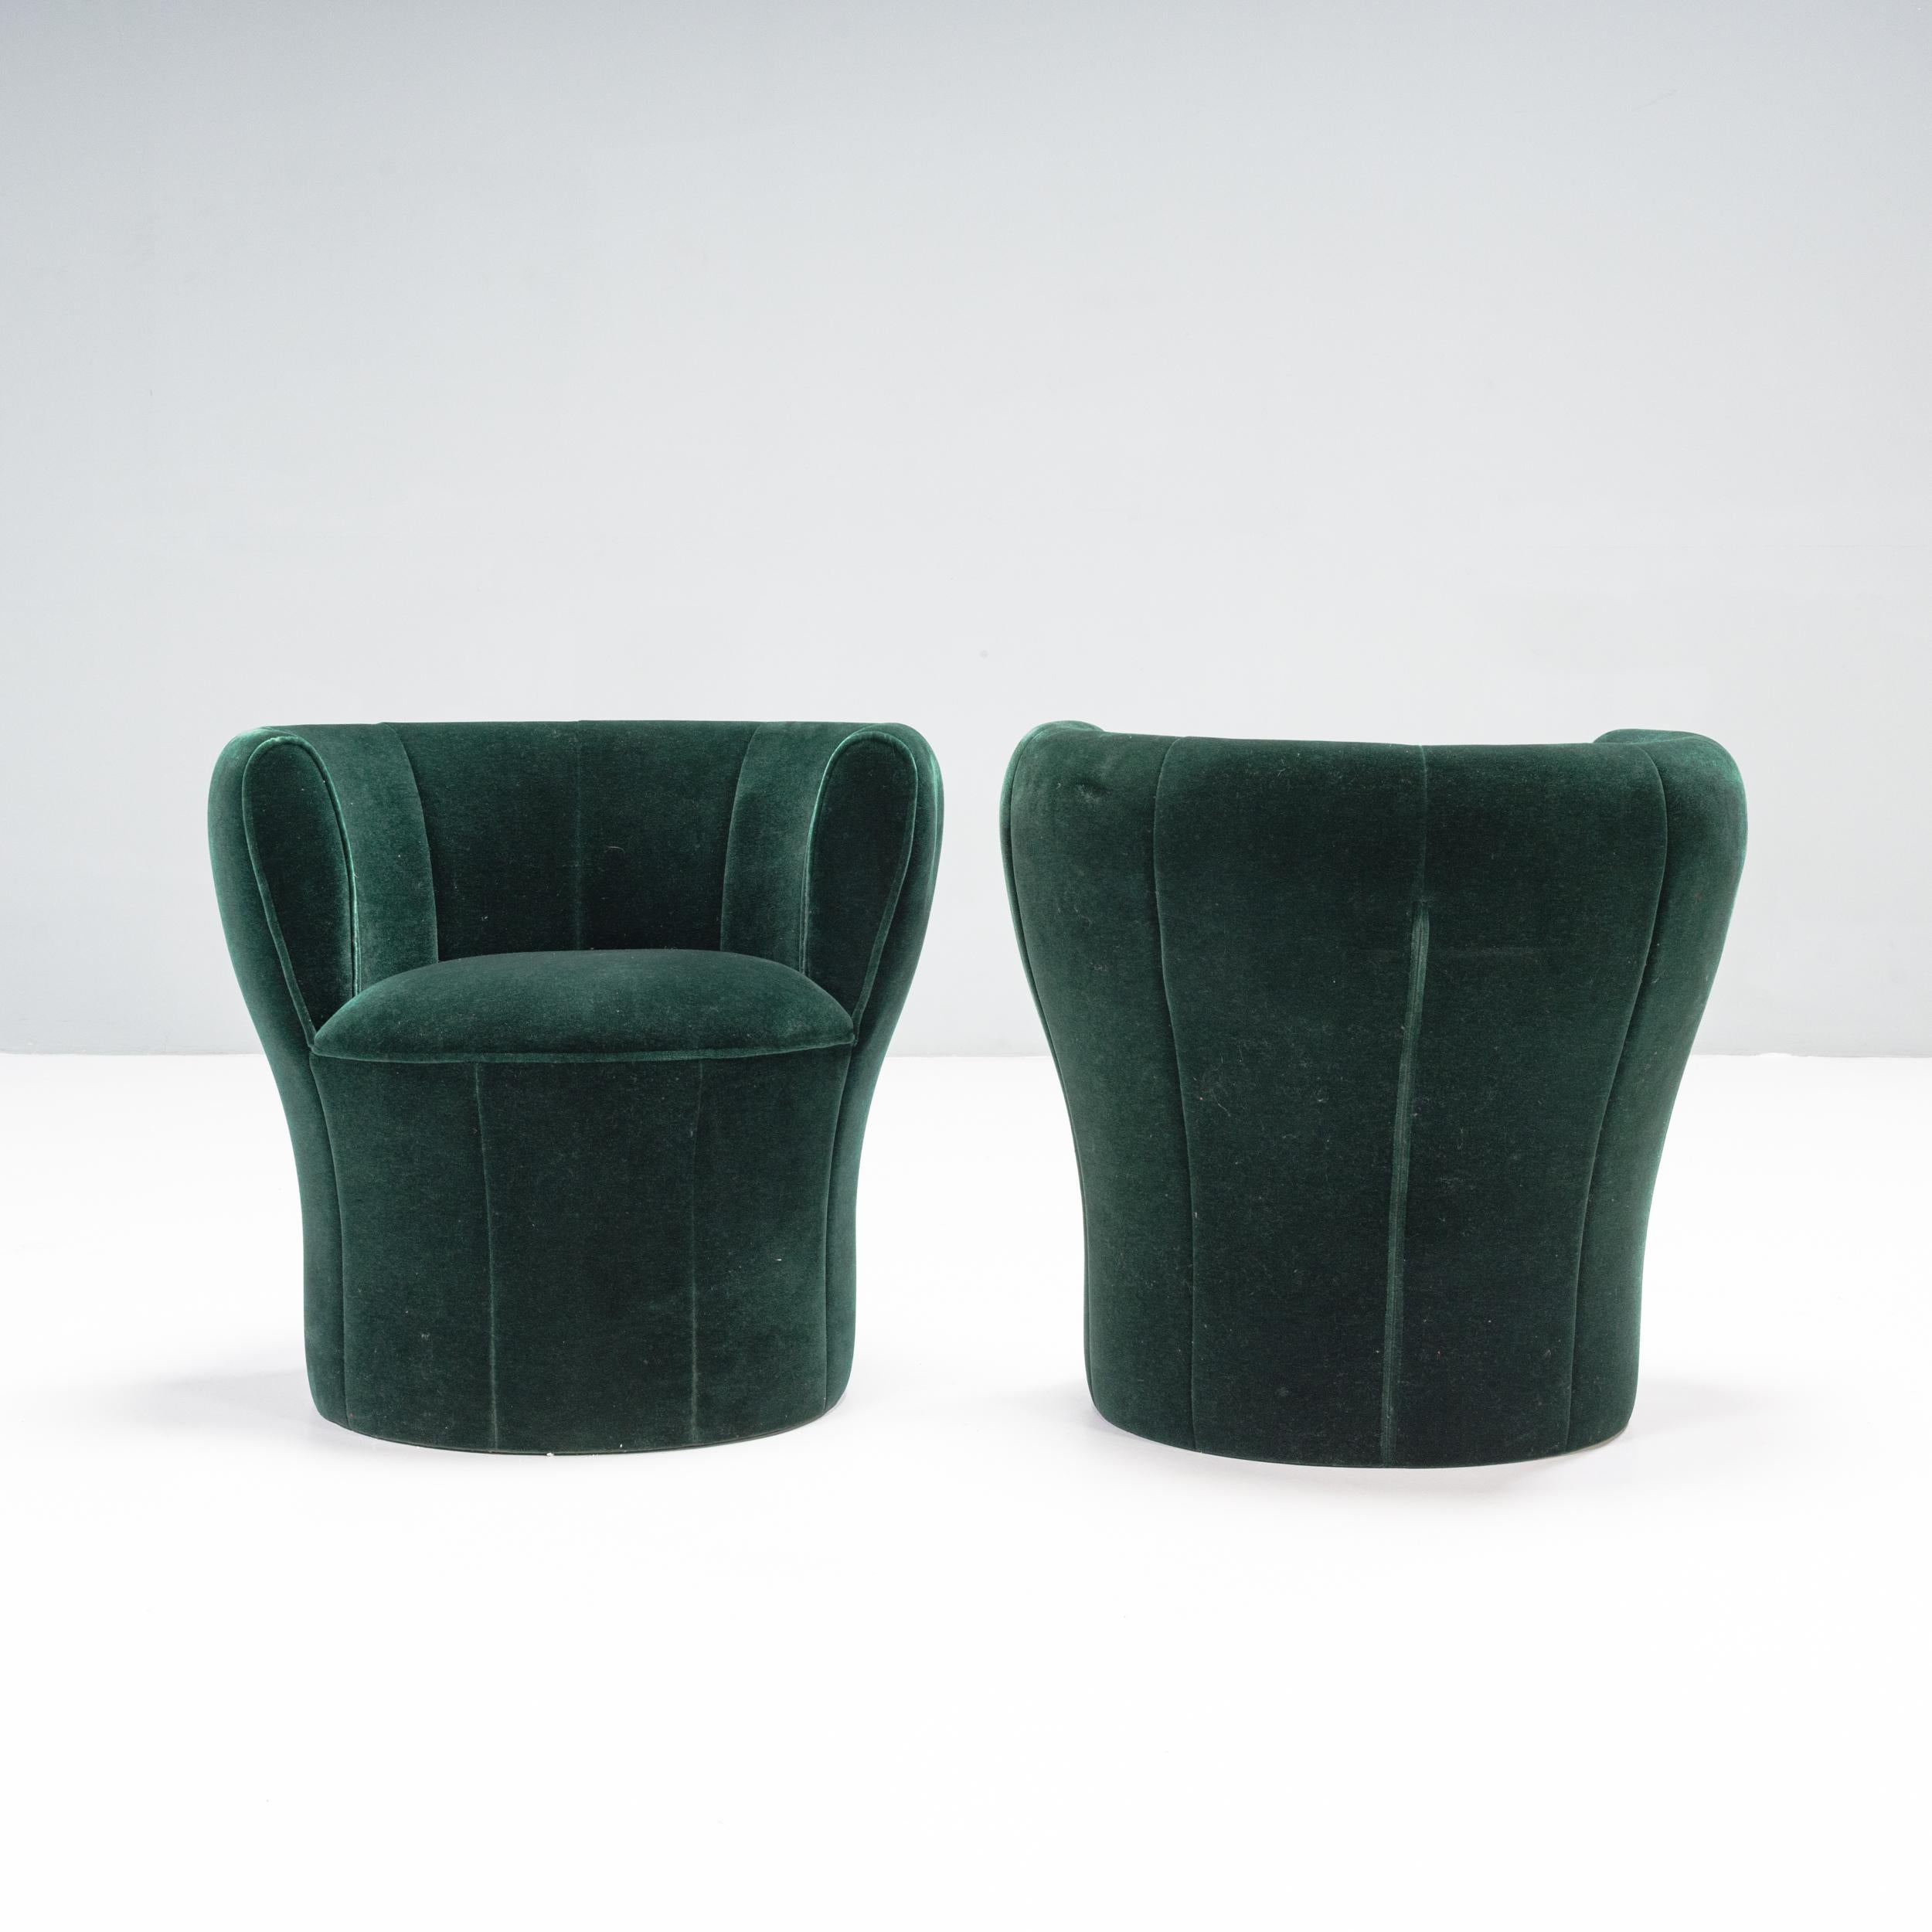 Designed by Laudani & Romanelli for Driade, the Lisa chair is a modern take on the classic club chair.

Designed with a circular shape, the backrest follows the curve of the chair to create a cocooned feel.

Fully upholstered in emerald green